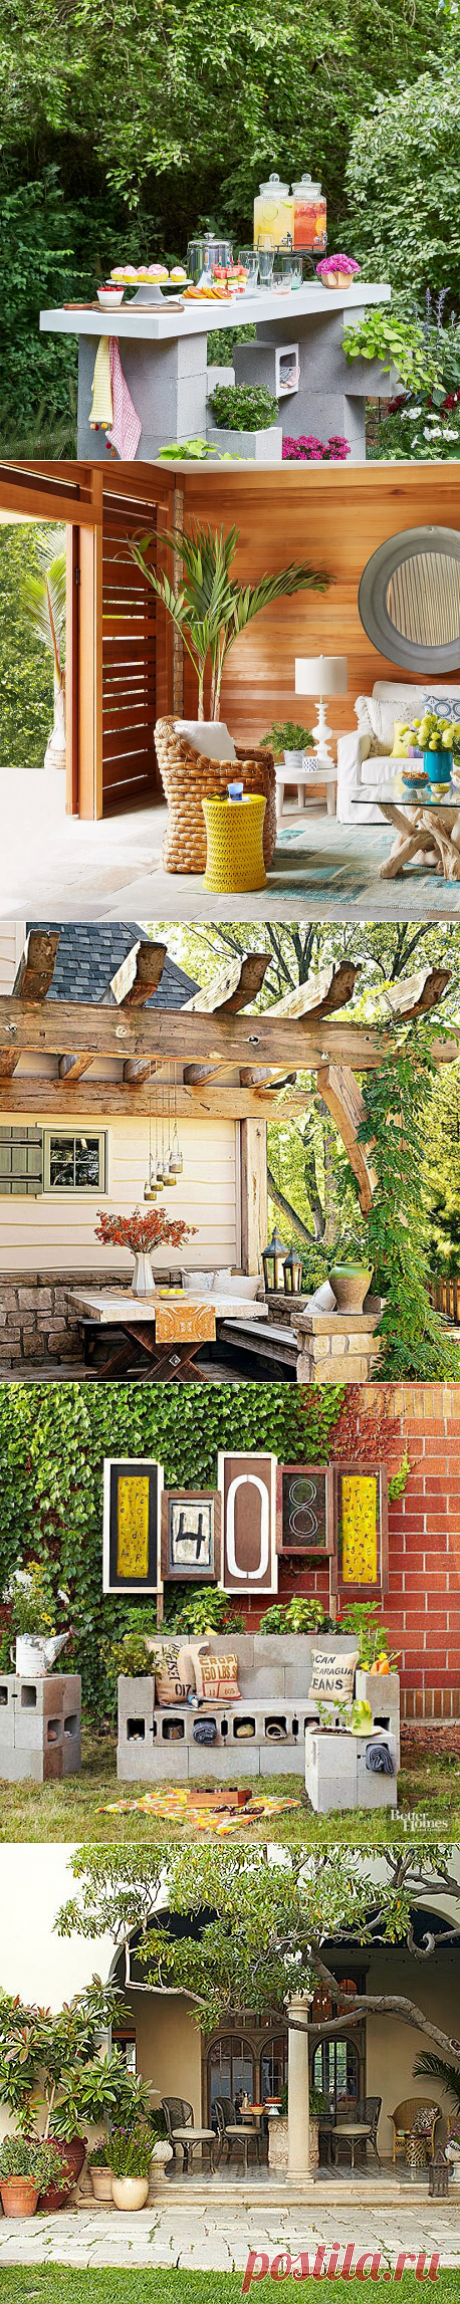 16 Great Patio Ideas | Better Homes & Gardens